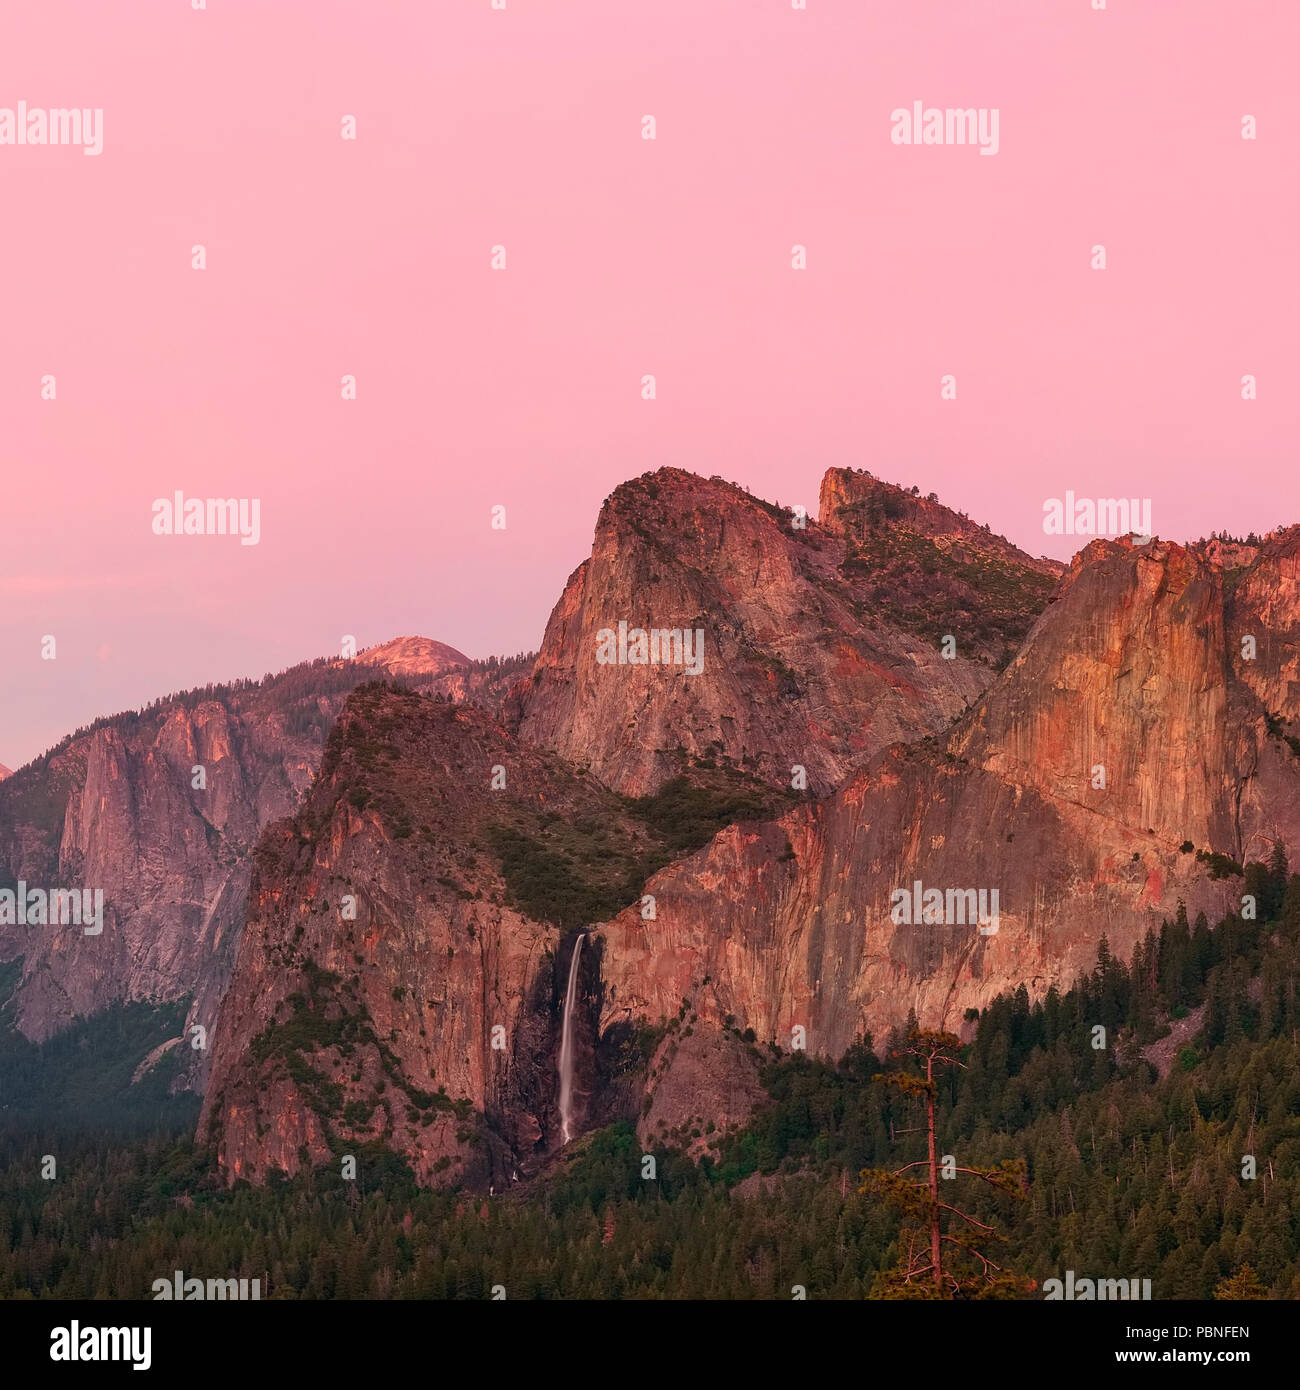 Yosemite Valley at sunset with mountains and waterfalls Stock Photo